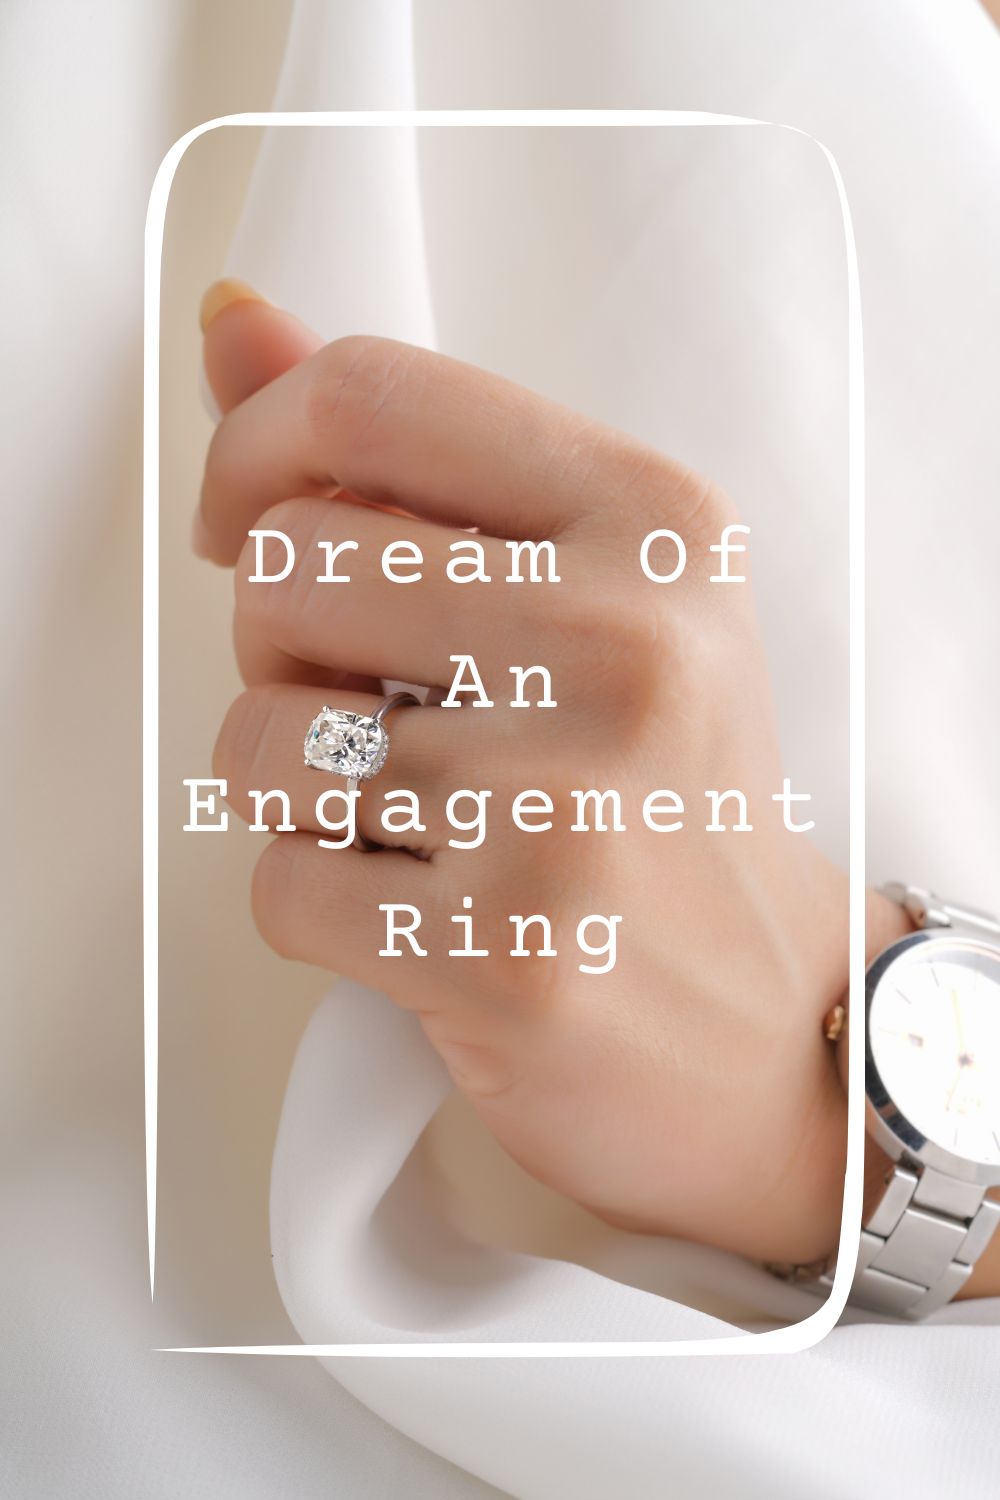 Dream Of An Engagement Ring Meanings 1